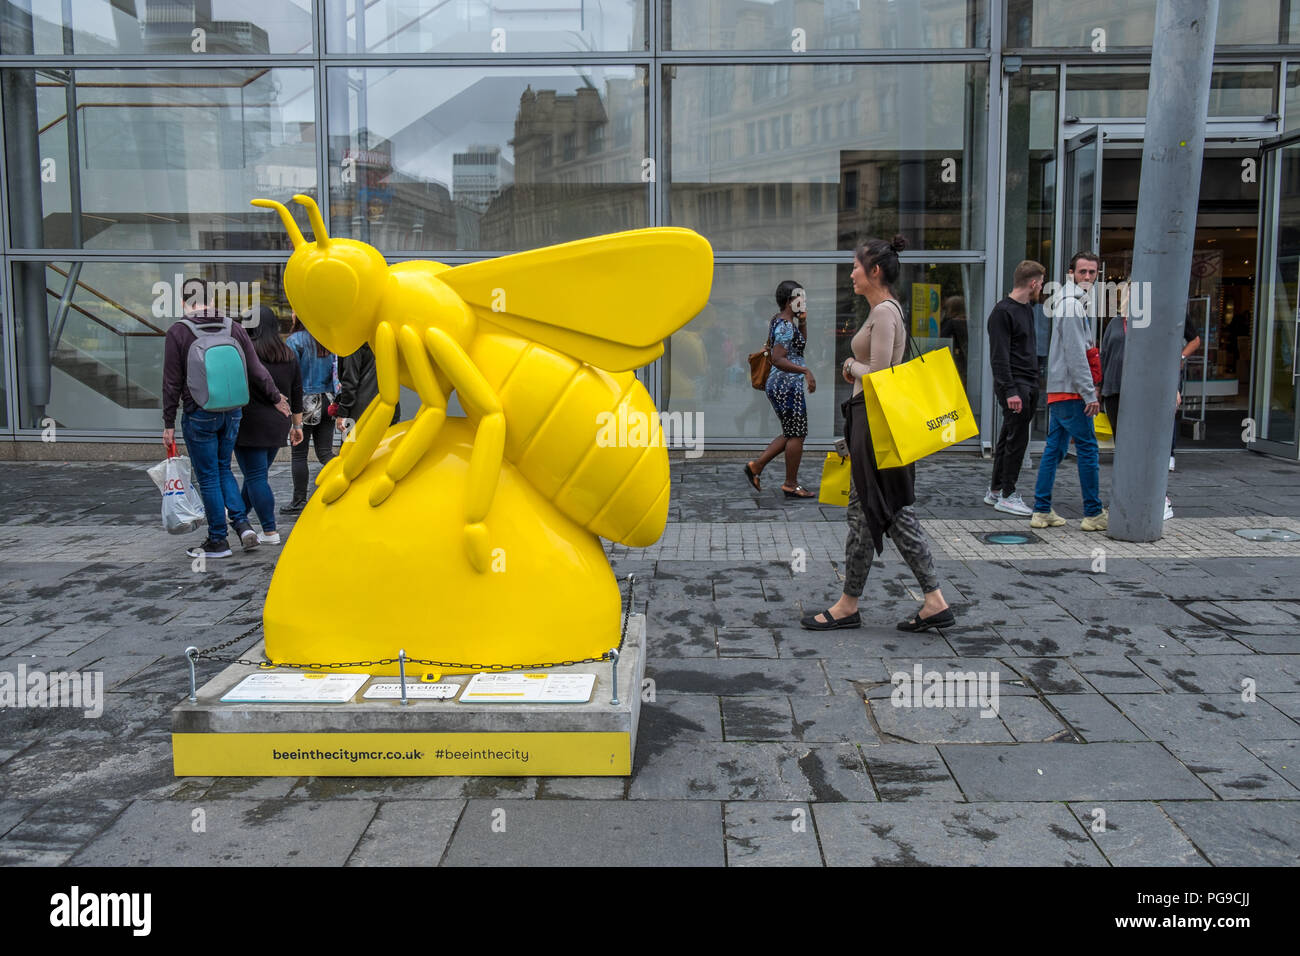 Lady with a large yellow bag walking passed a yellow bee in the city Stock Photo